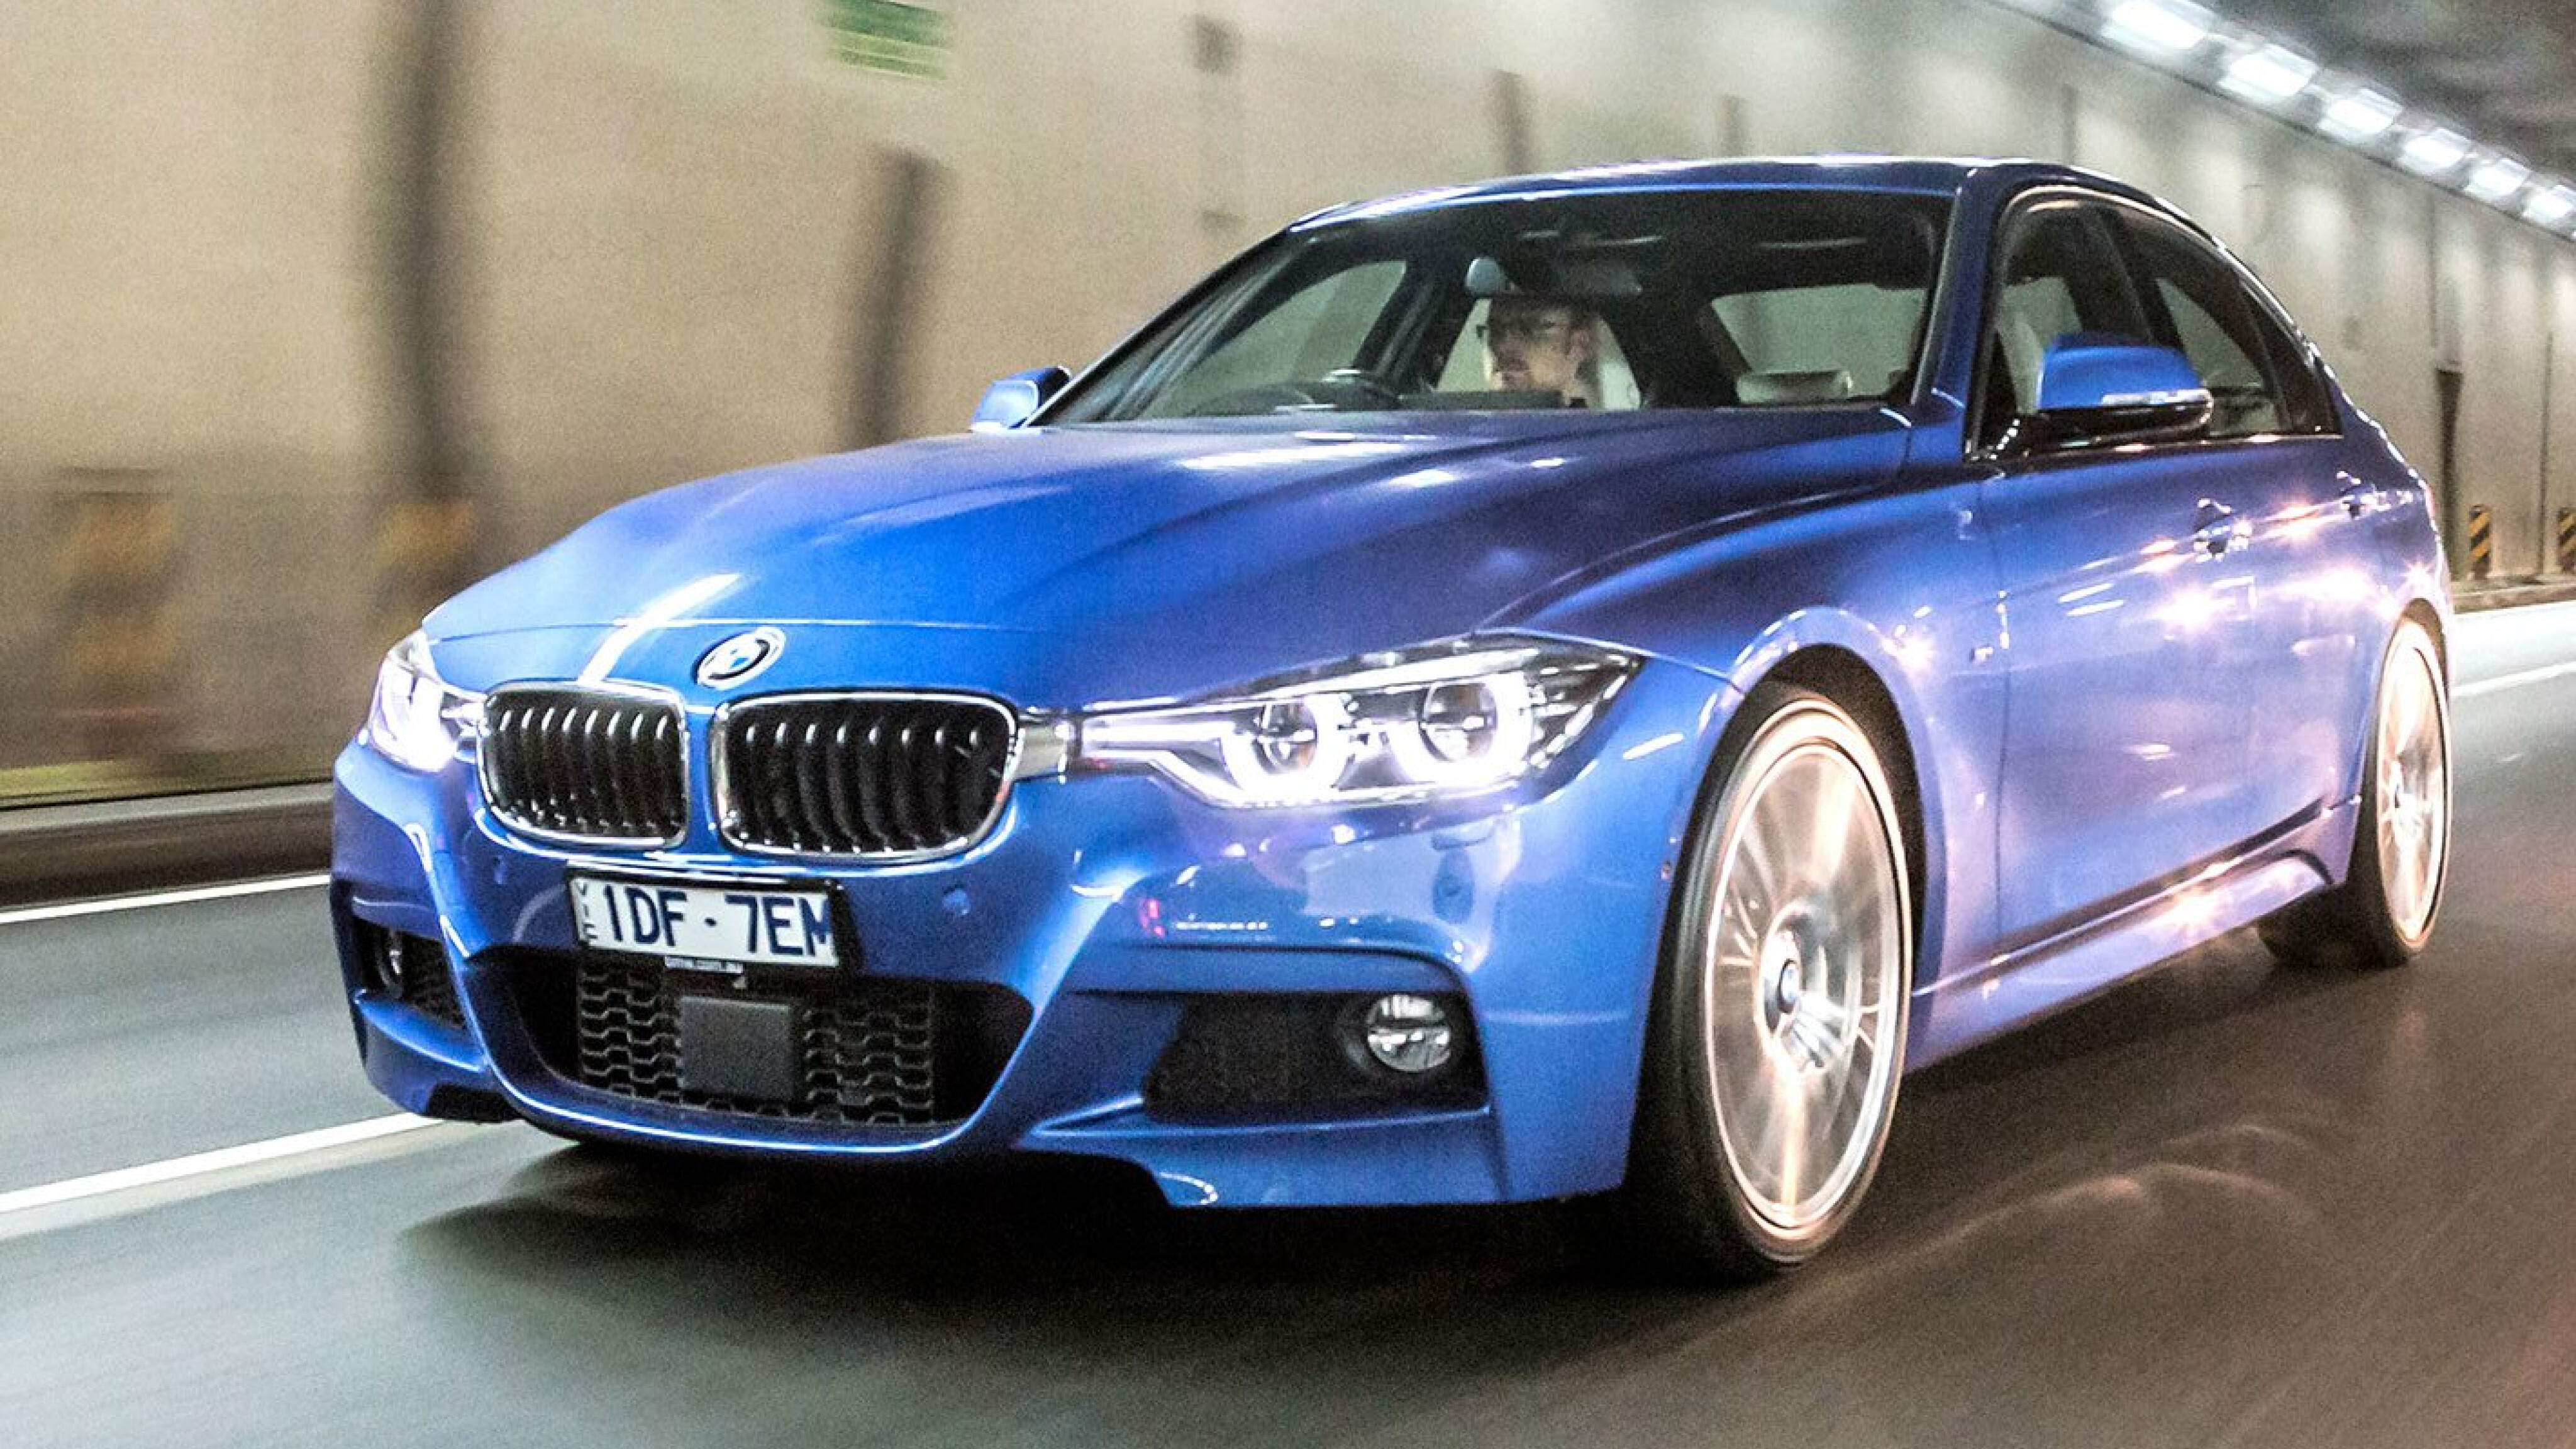 Everything you need to know about buying a sixth-generation (F30